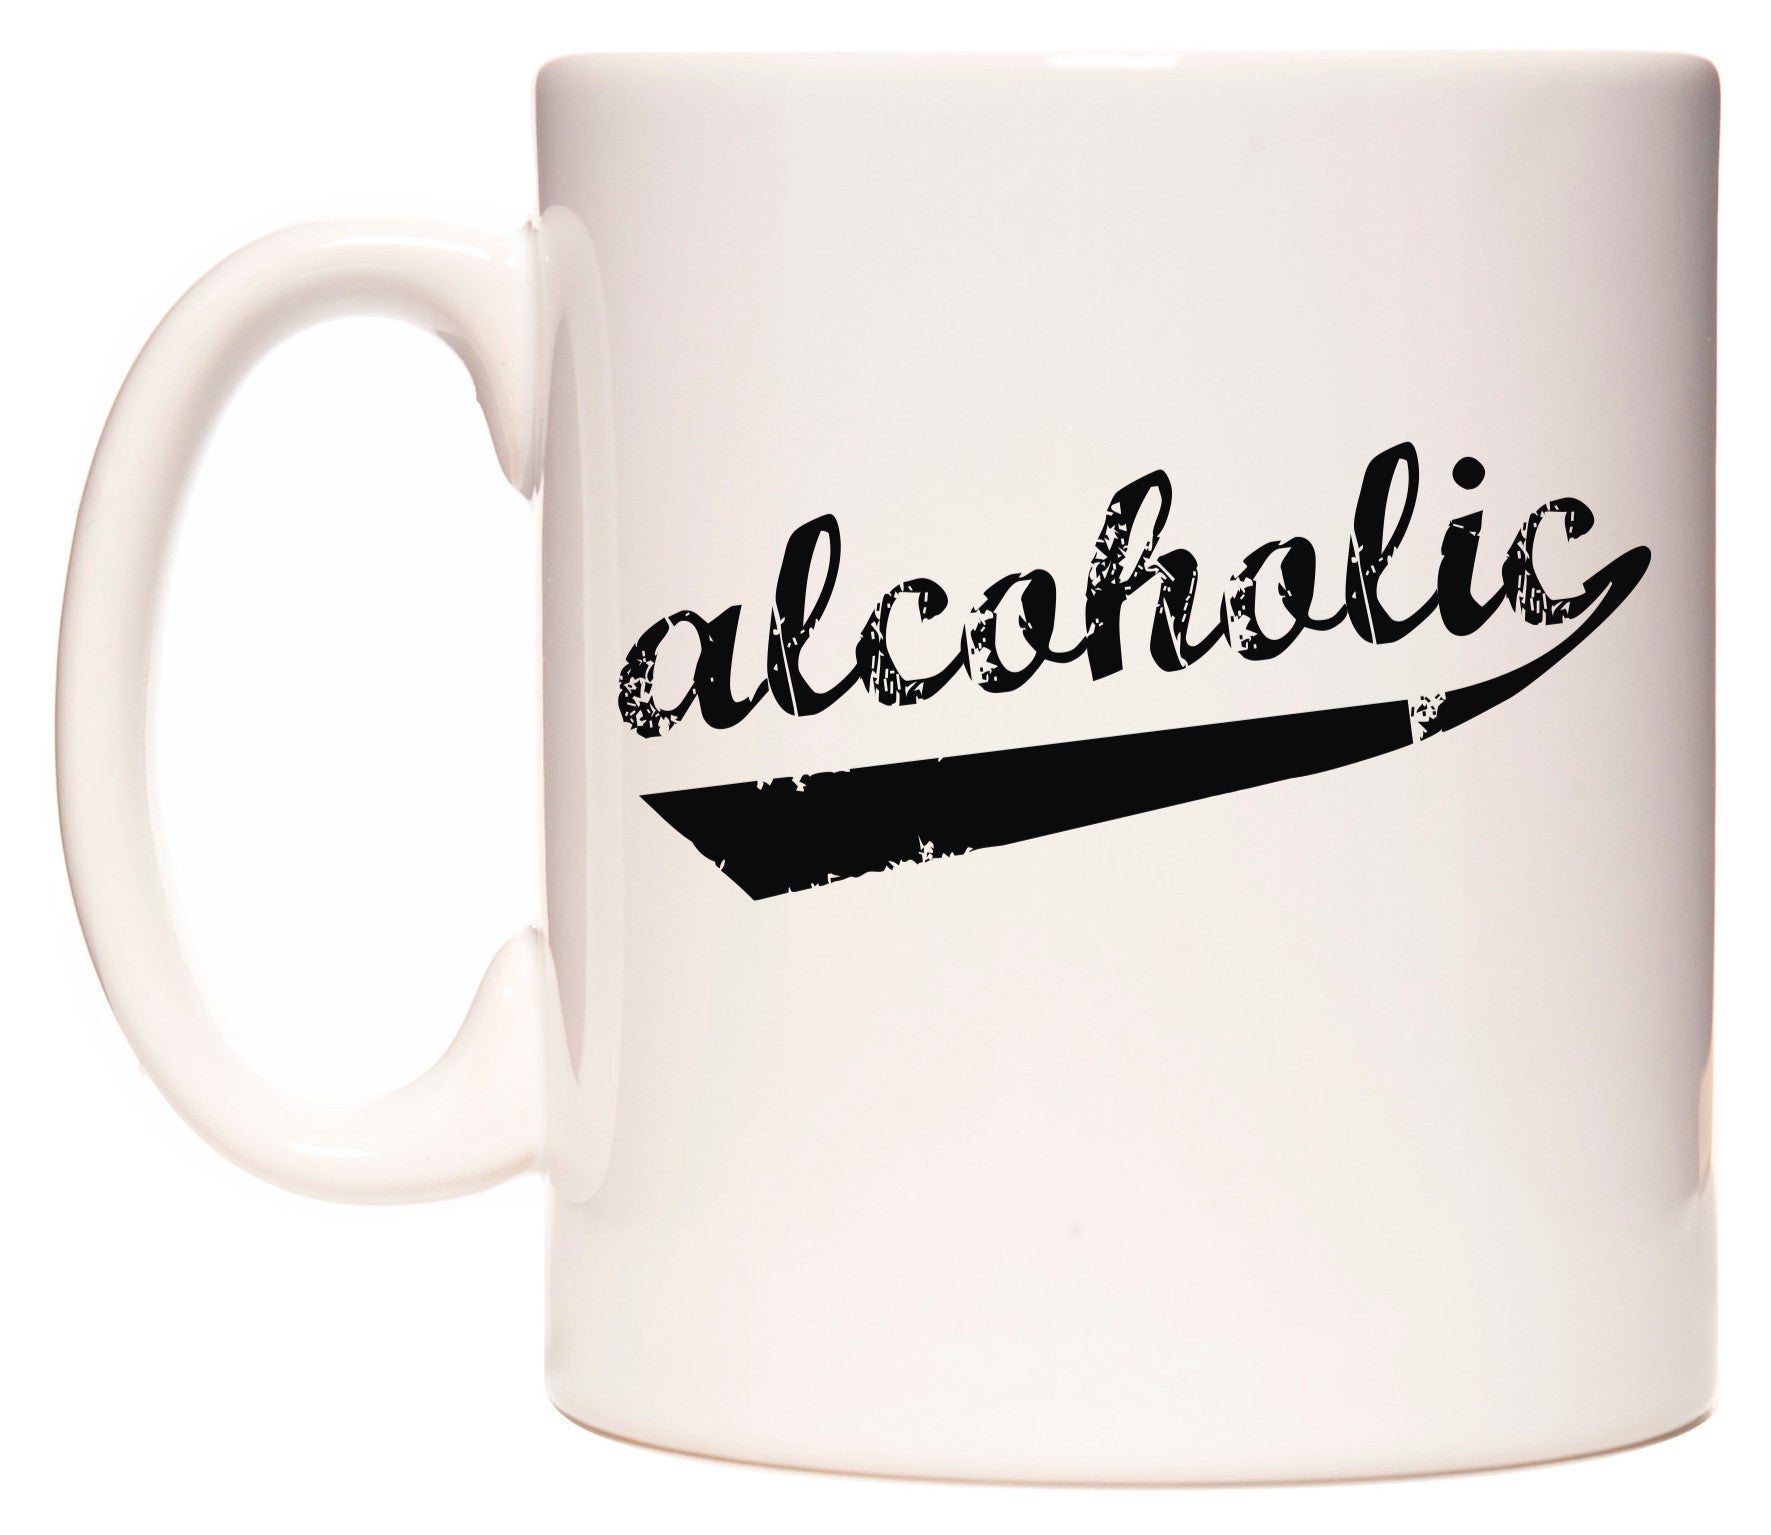 This mug features Alcoholic